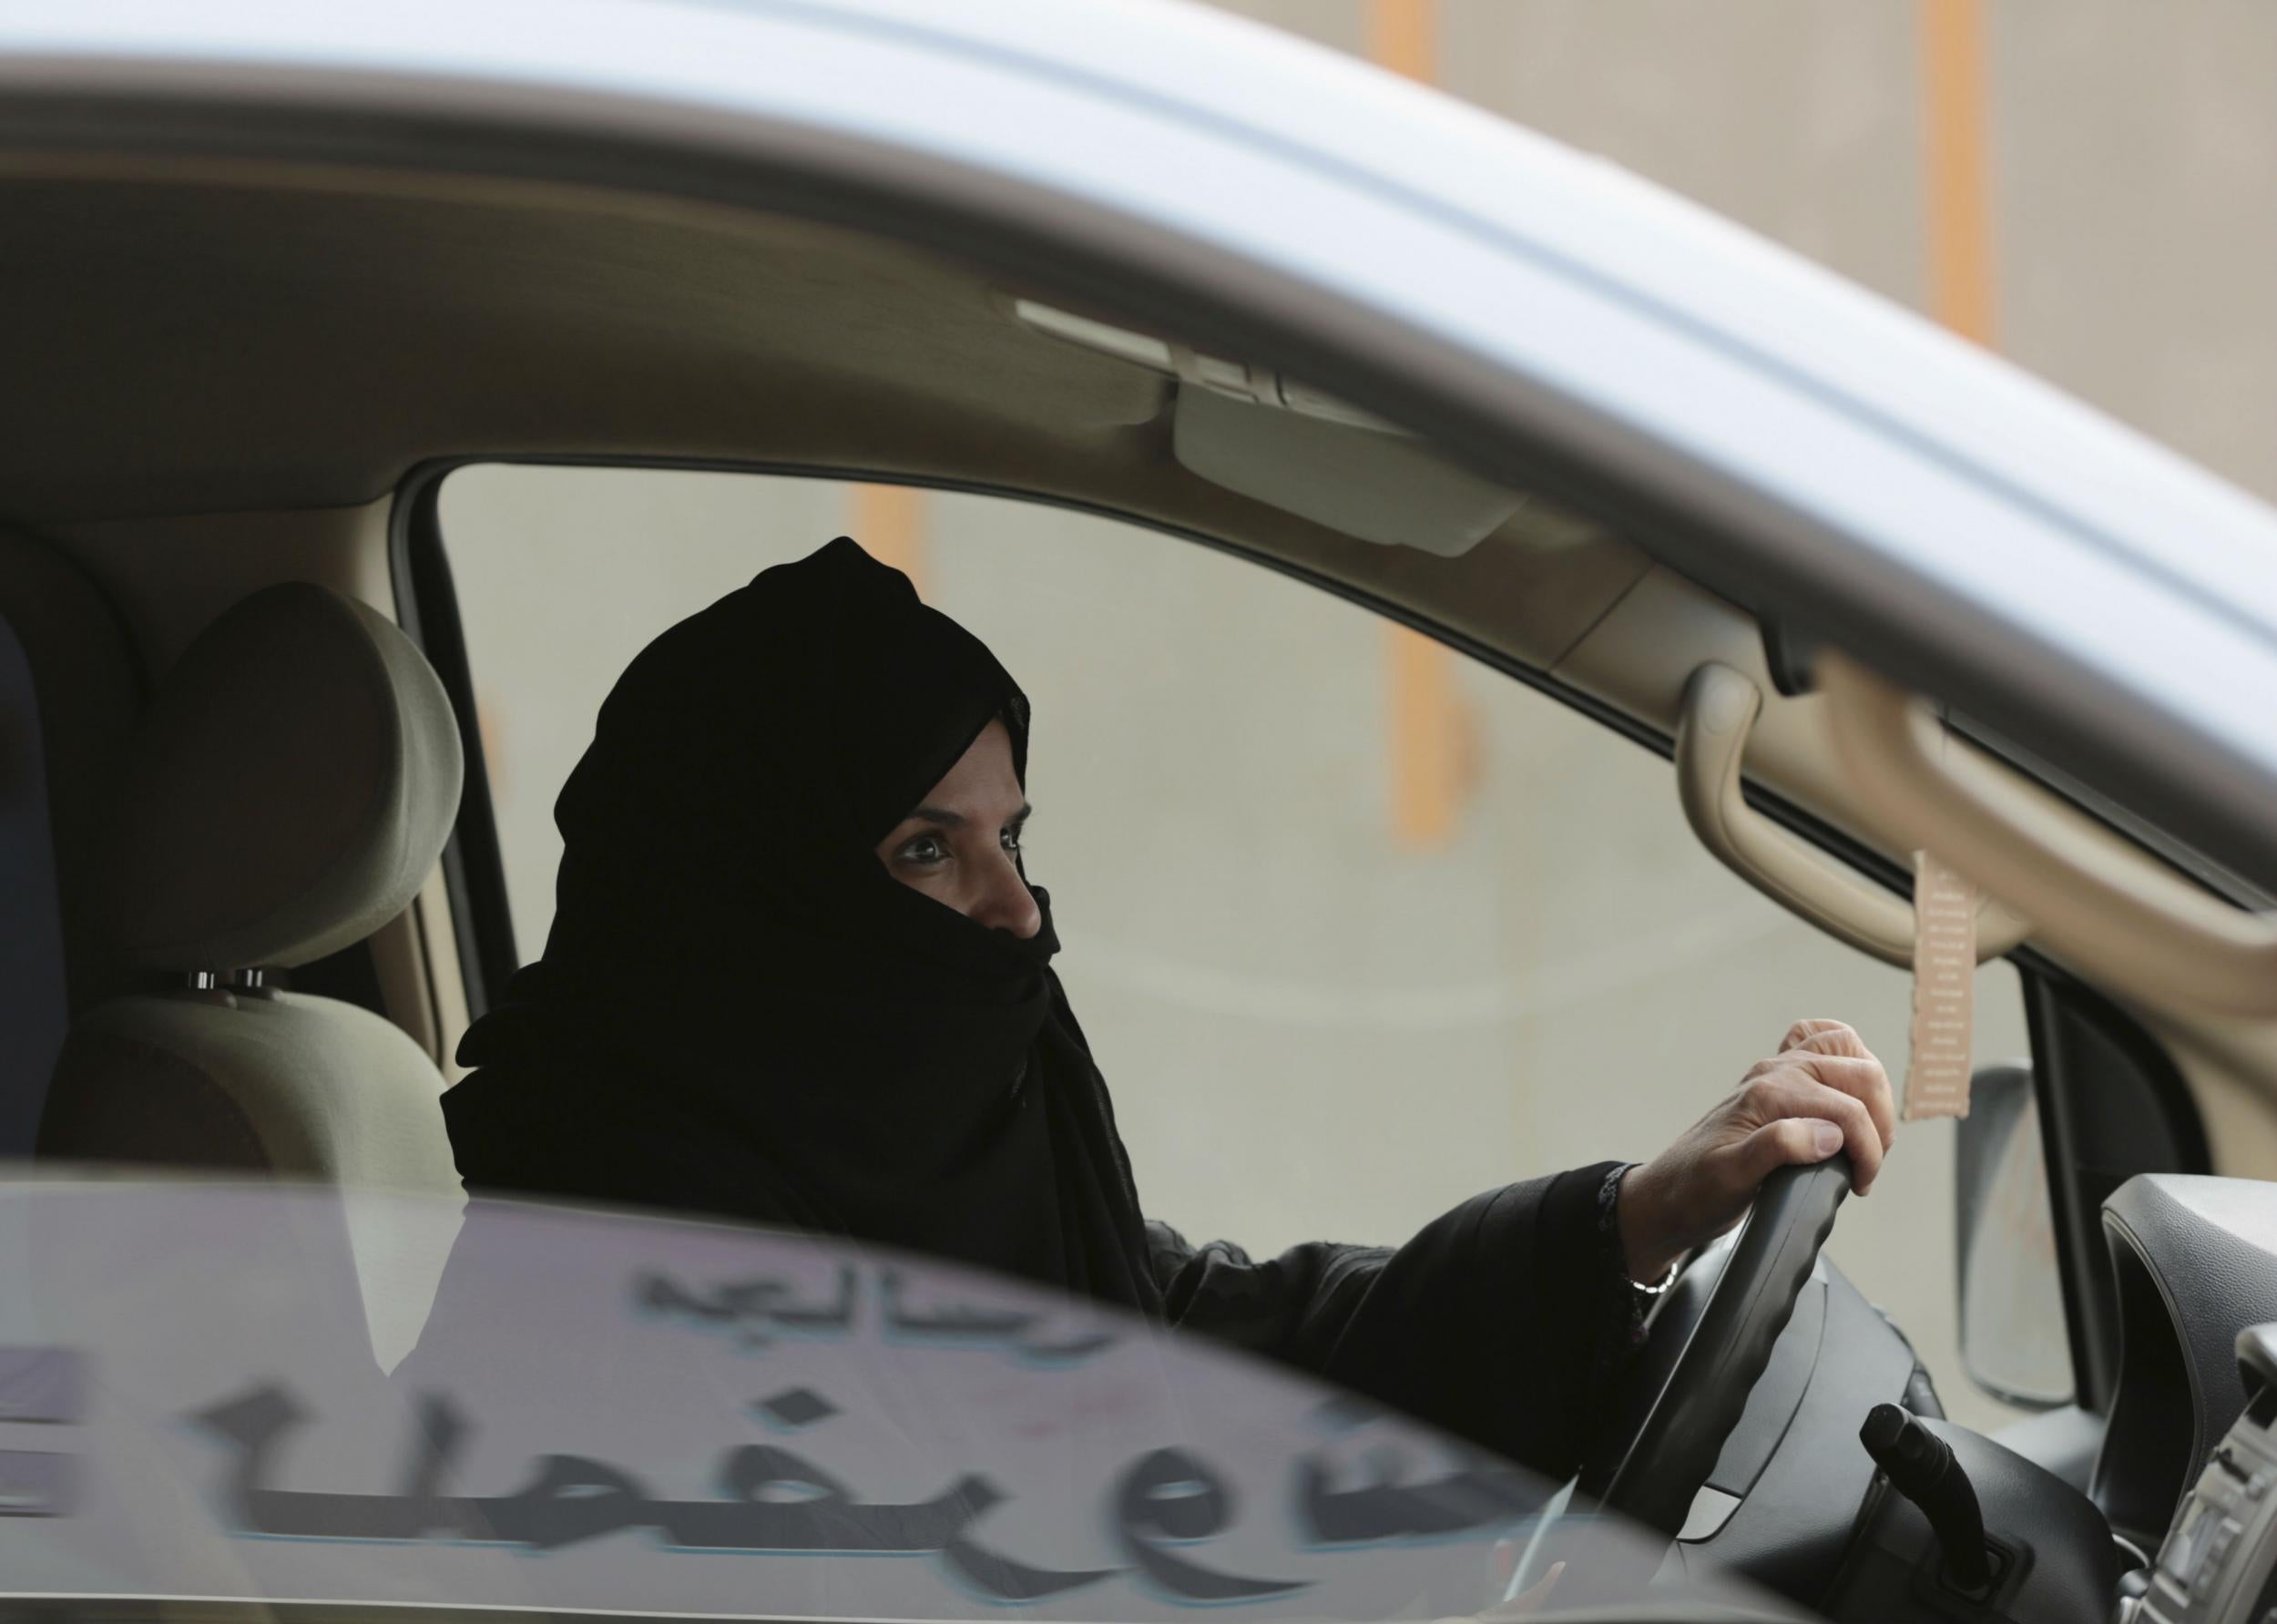 What was an act of defiance in March 2014 – when this photo of a woman driving in Riyadh was taken – will soon be legal